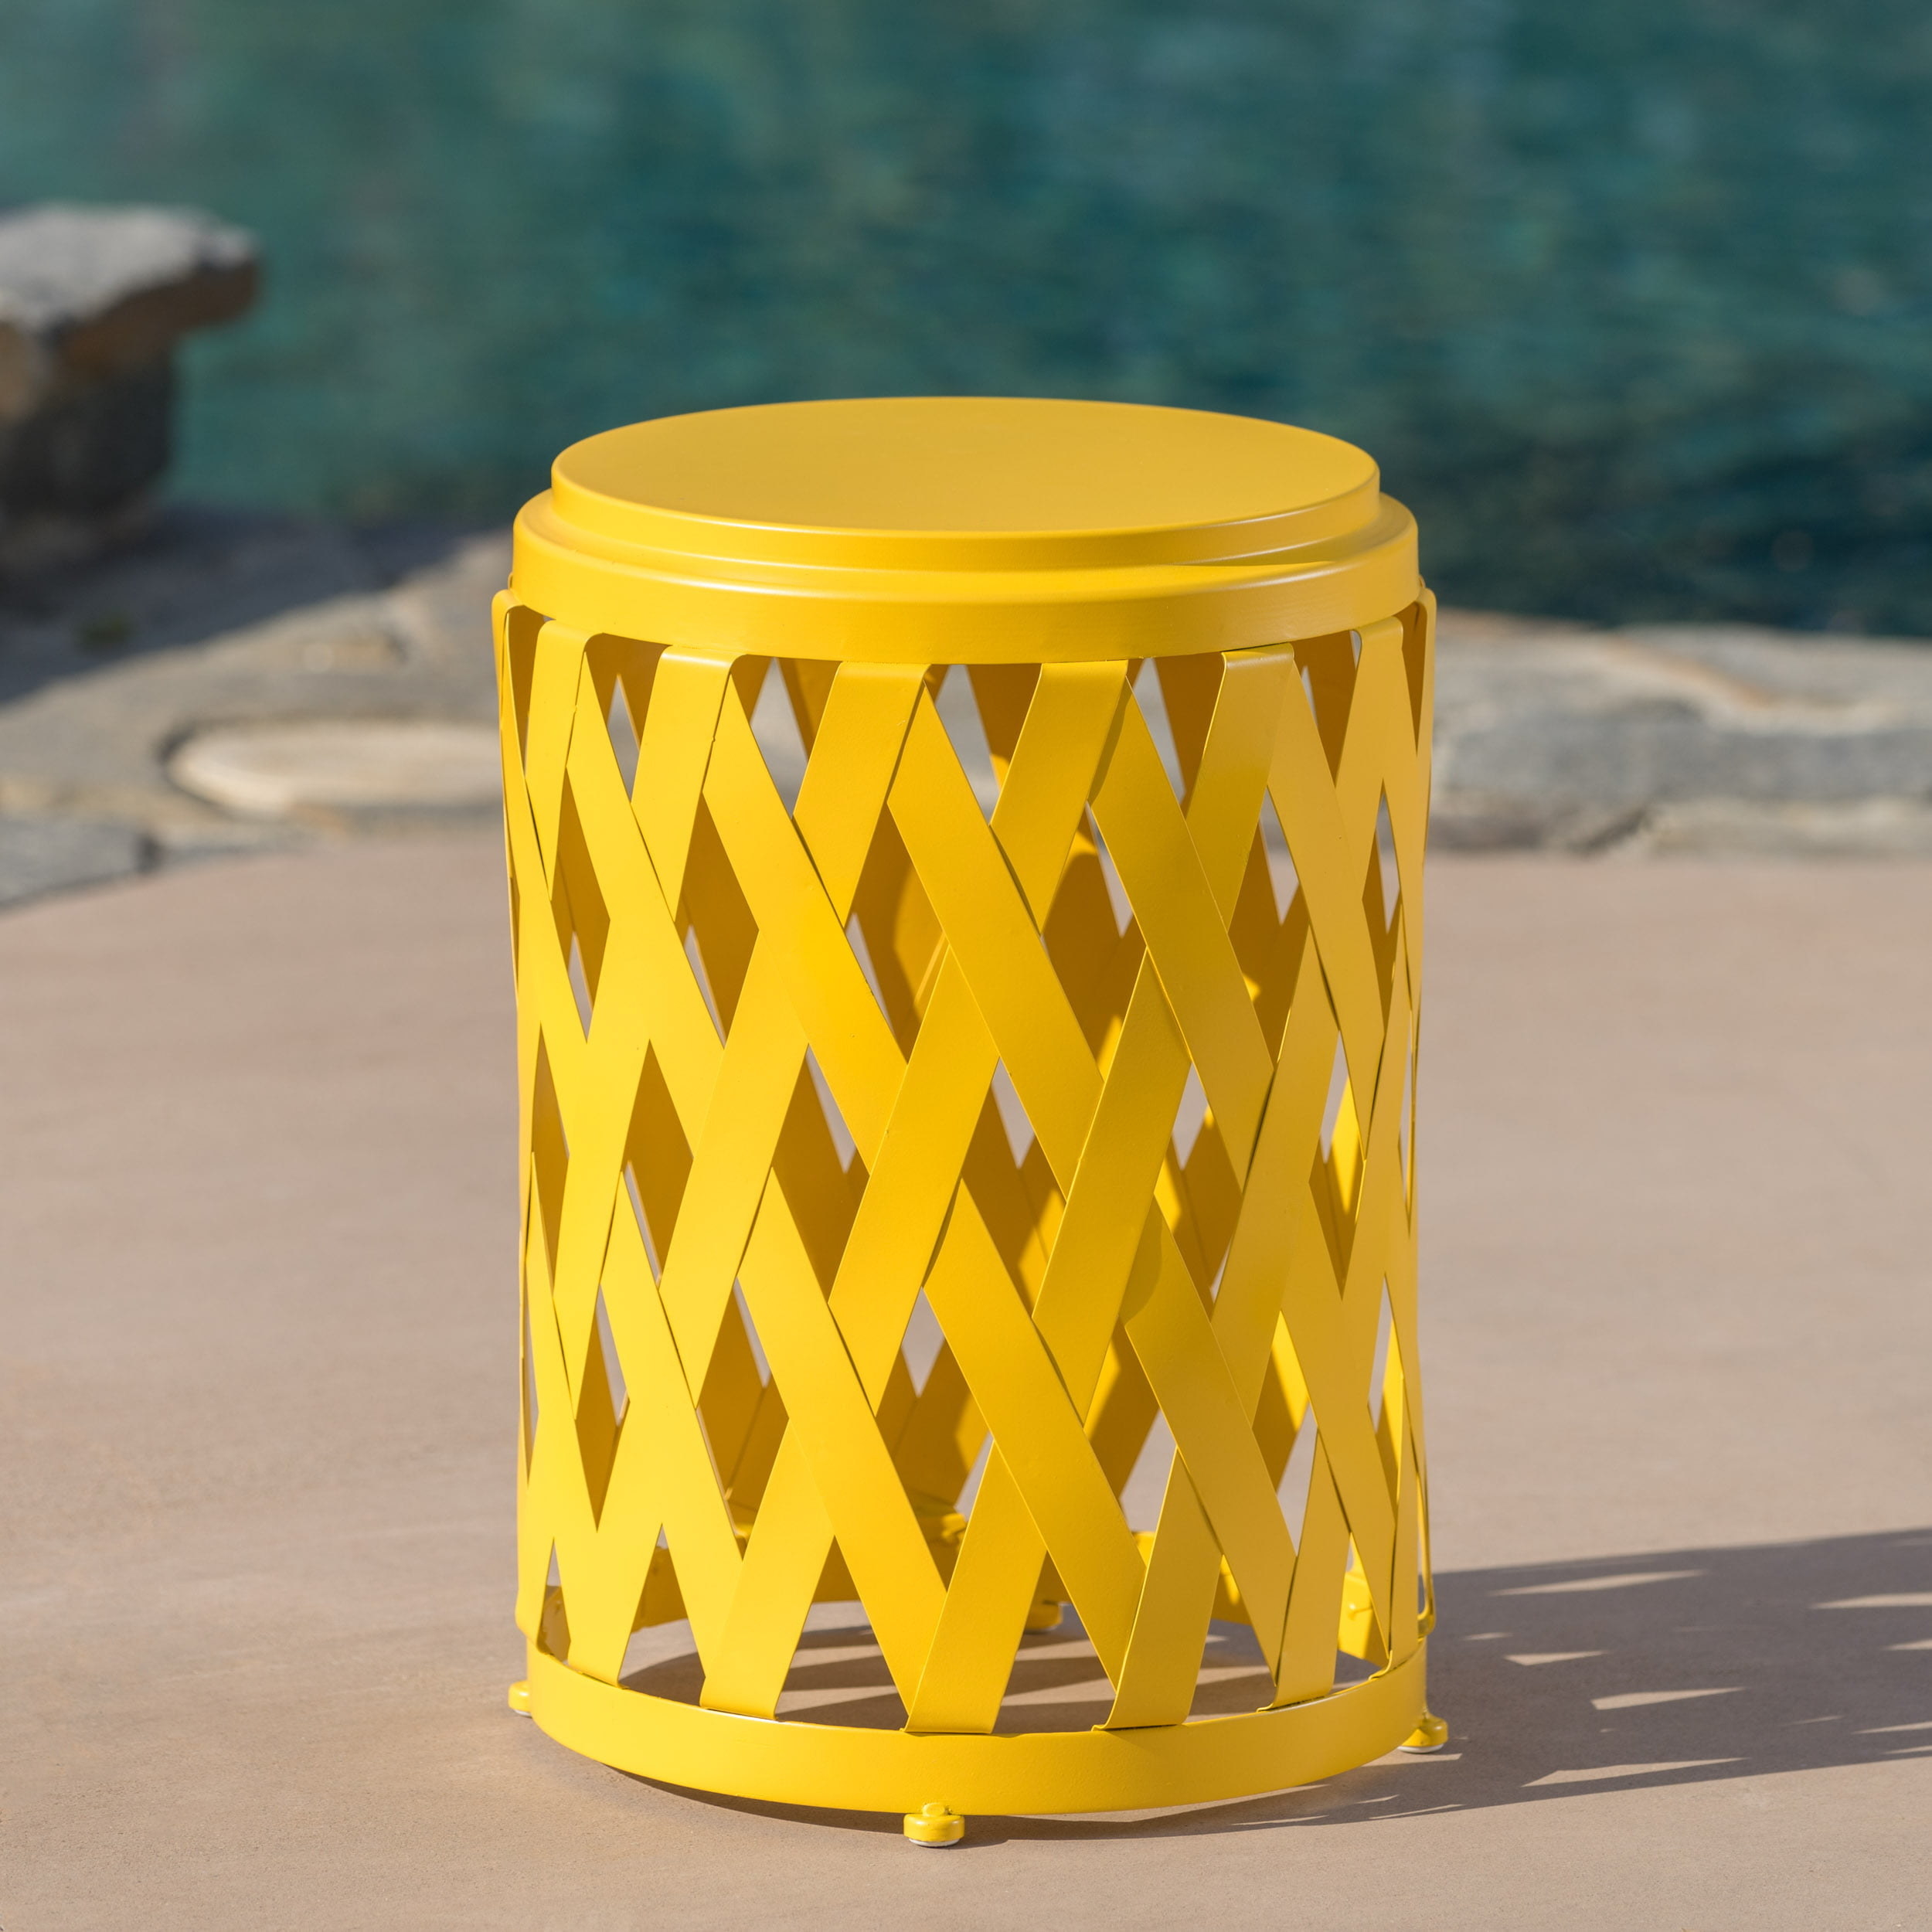 the yellow side table